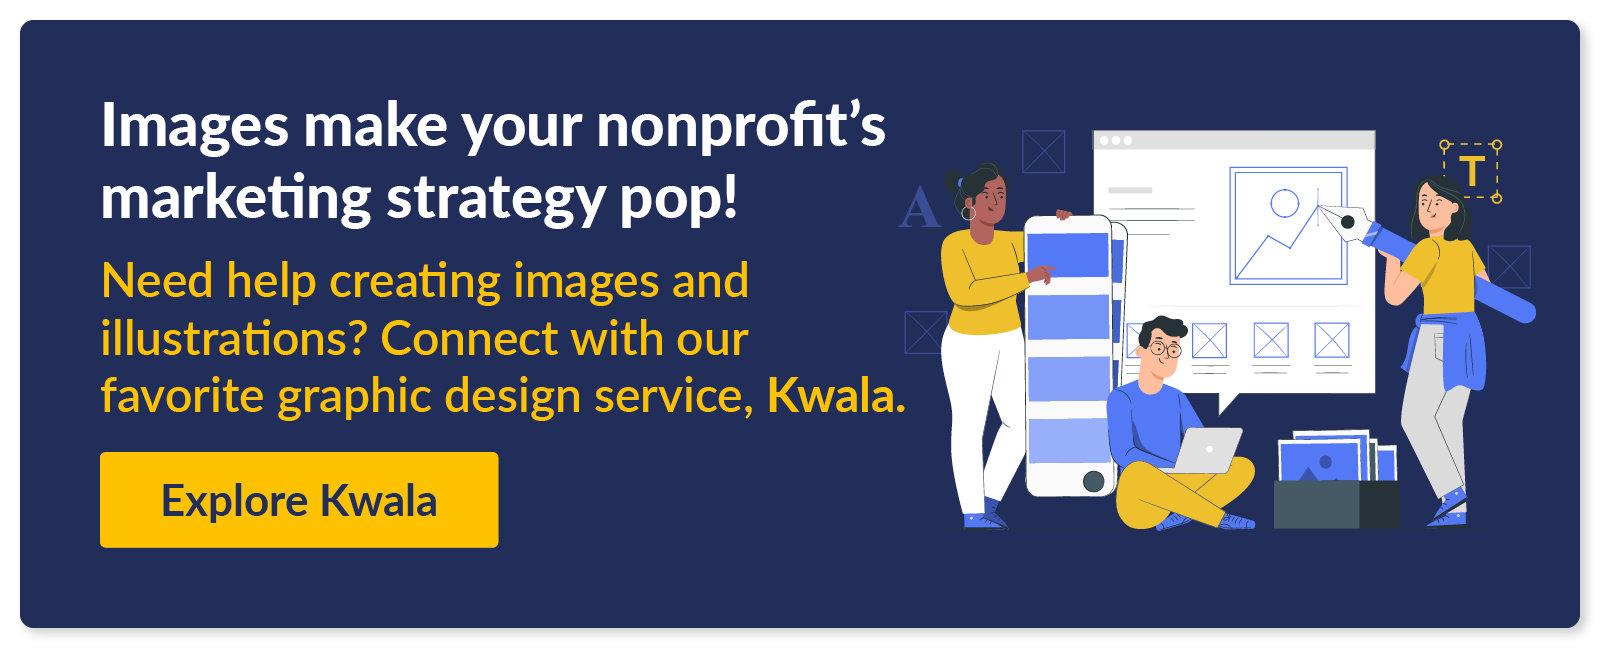 Image make your nonprofit's marketing strategy pop! Need help creating images and illustrations? Connect with our favorite graphic design service, Kwala. 